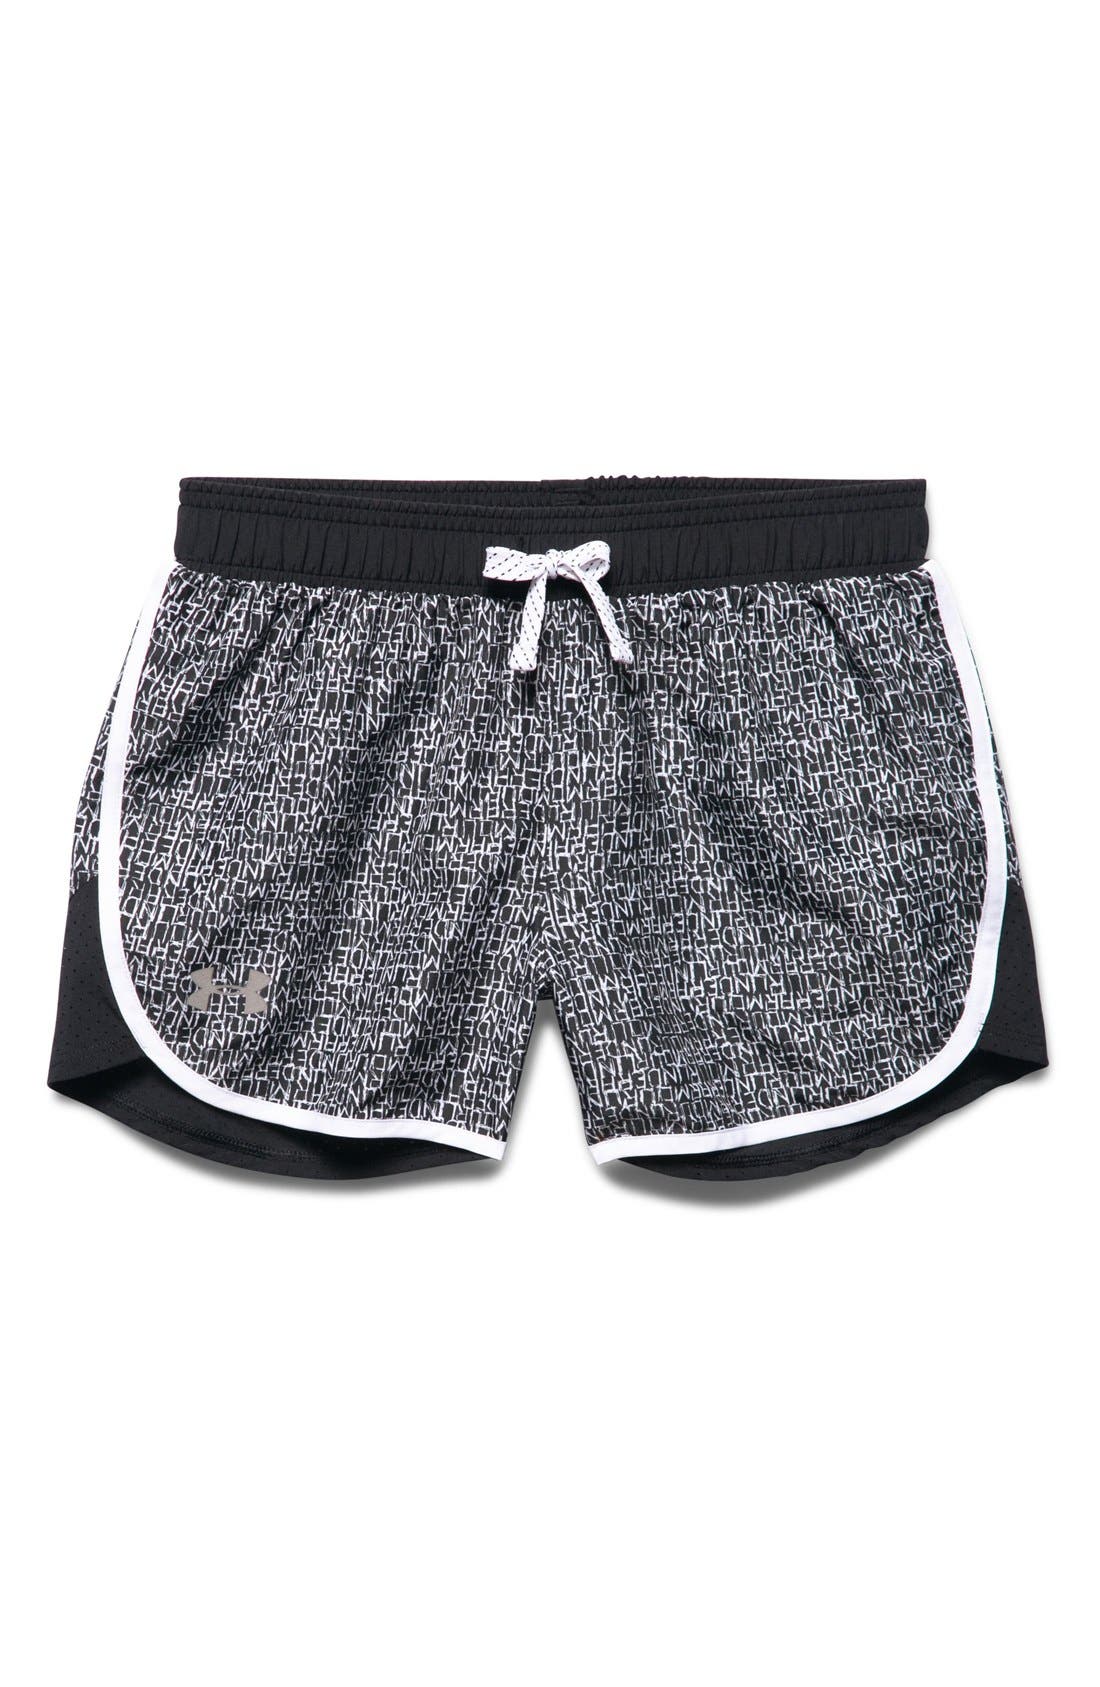 under armour fast lane shorts